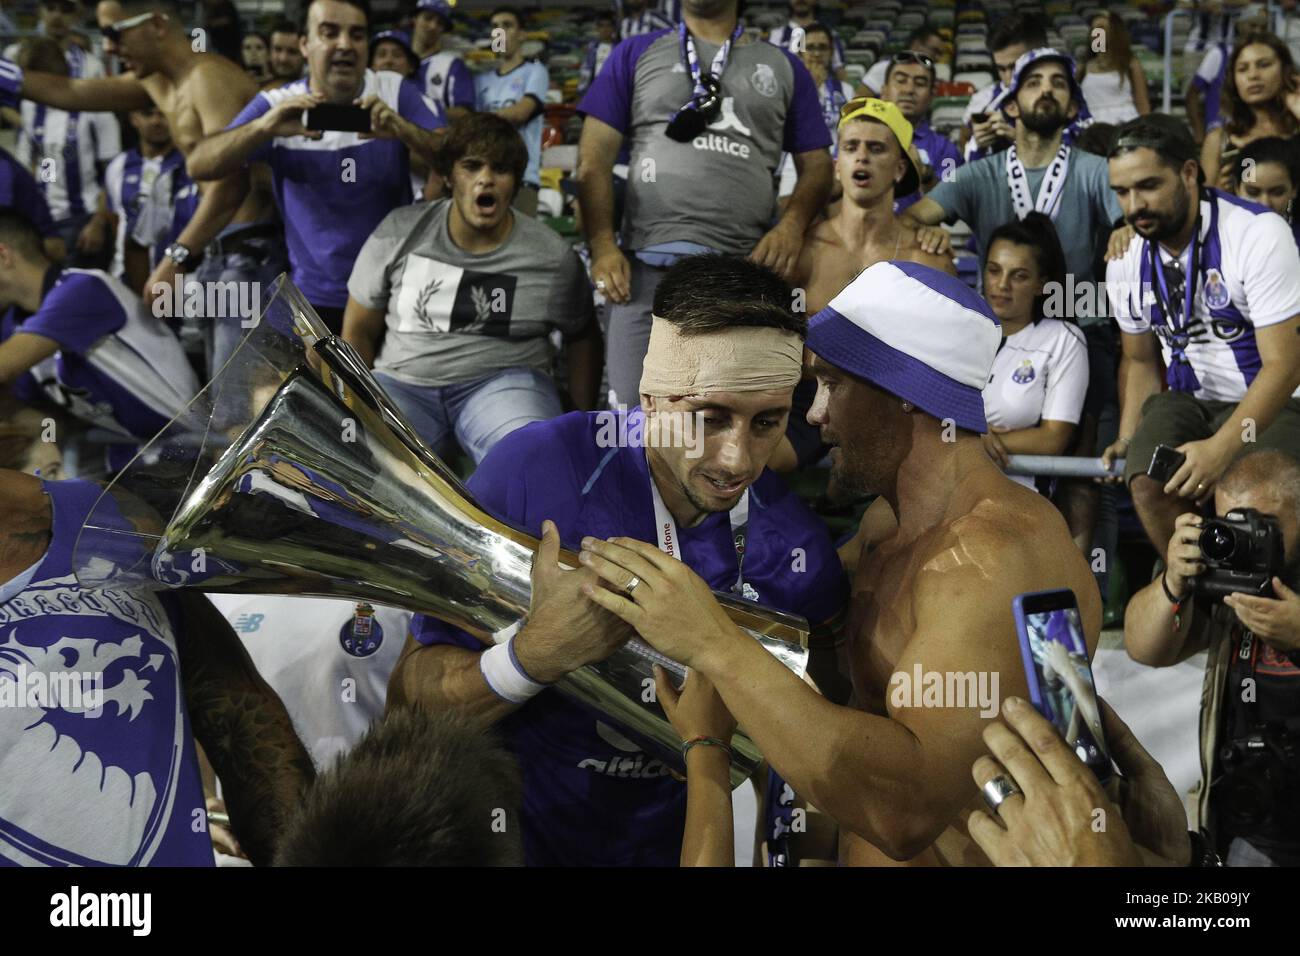 Porto's Mexican midfielder Hector Herrera celebrating with trophy after wining the Candido Oliveira Super Cup match between FC Porto and CD Aves, at Municipal de Aveiro Stadium on August 4, 2018 in Aveiro, Portugal. (Photo by Paulo Oliveira / DPI / NurPhoto) Stock Photo